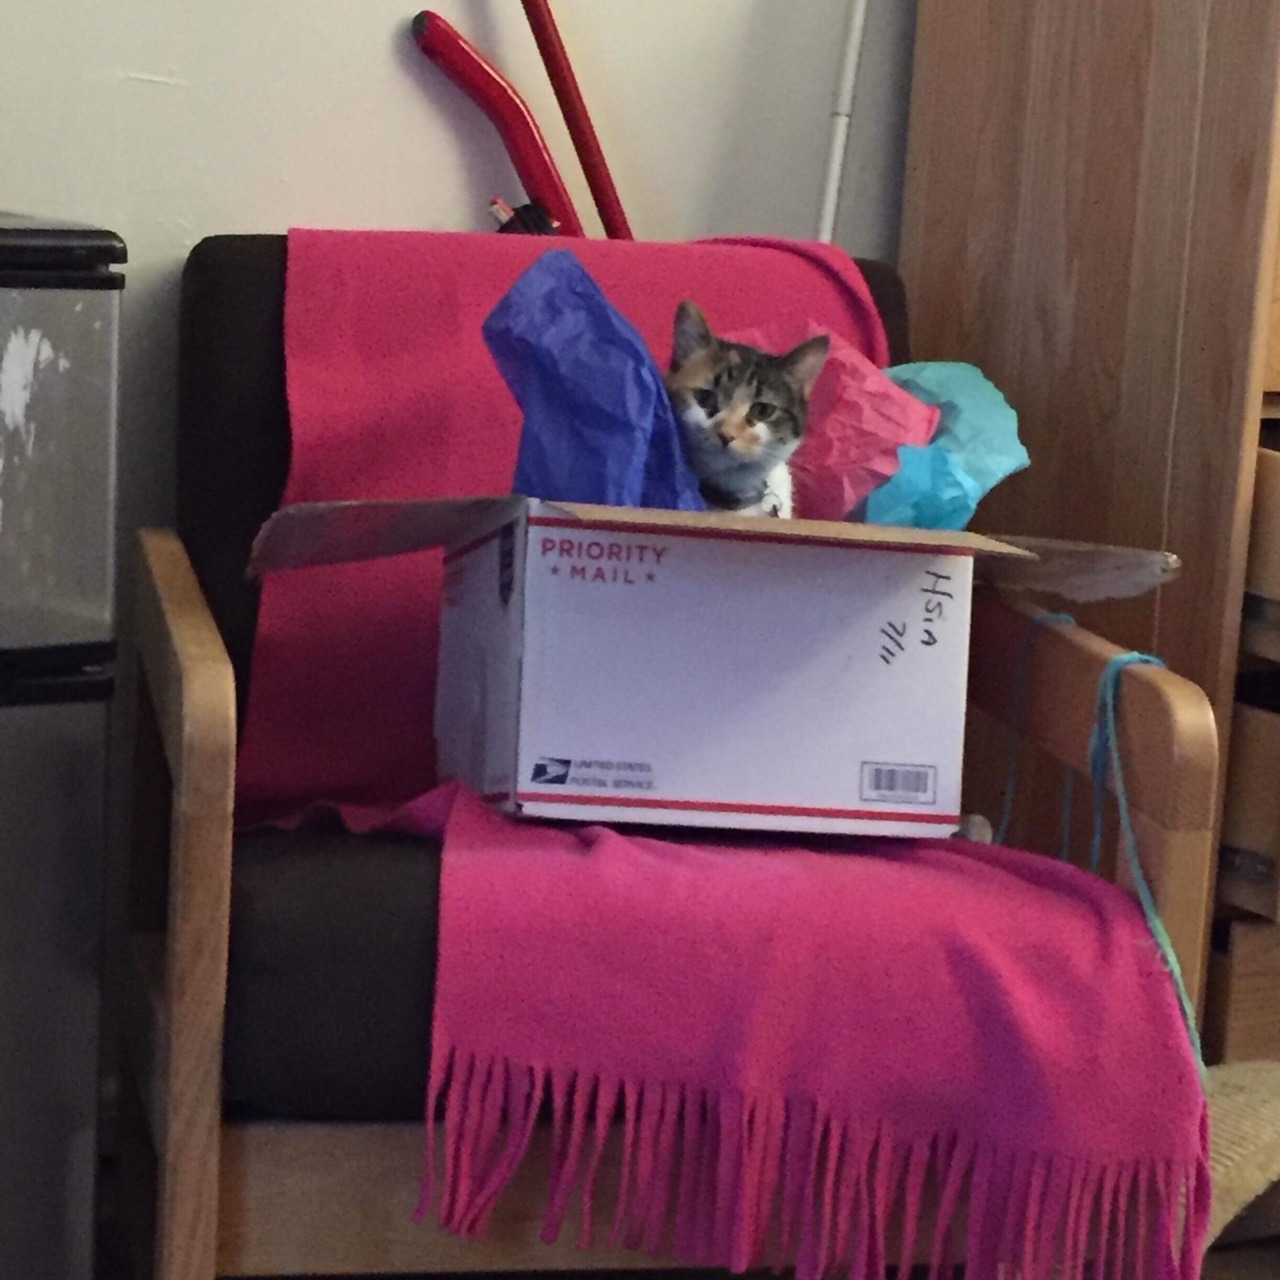 penicillium-pusher:  penicillium-pusher:   Naomi loves laying in boxes, but she was